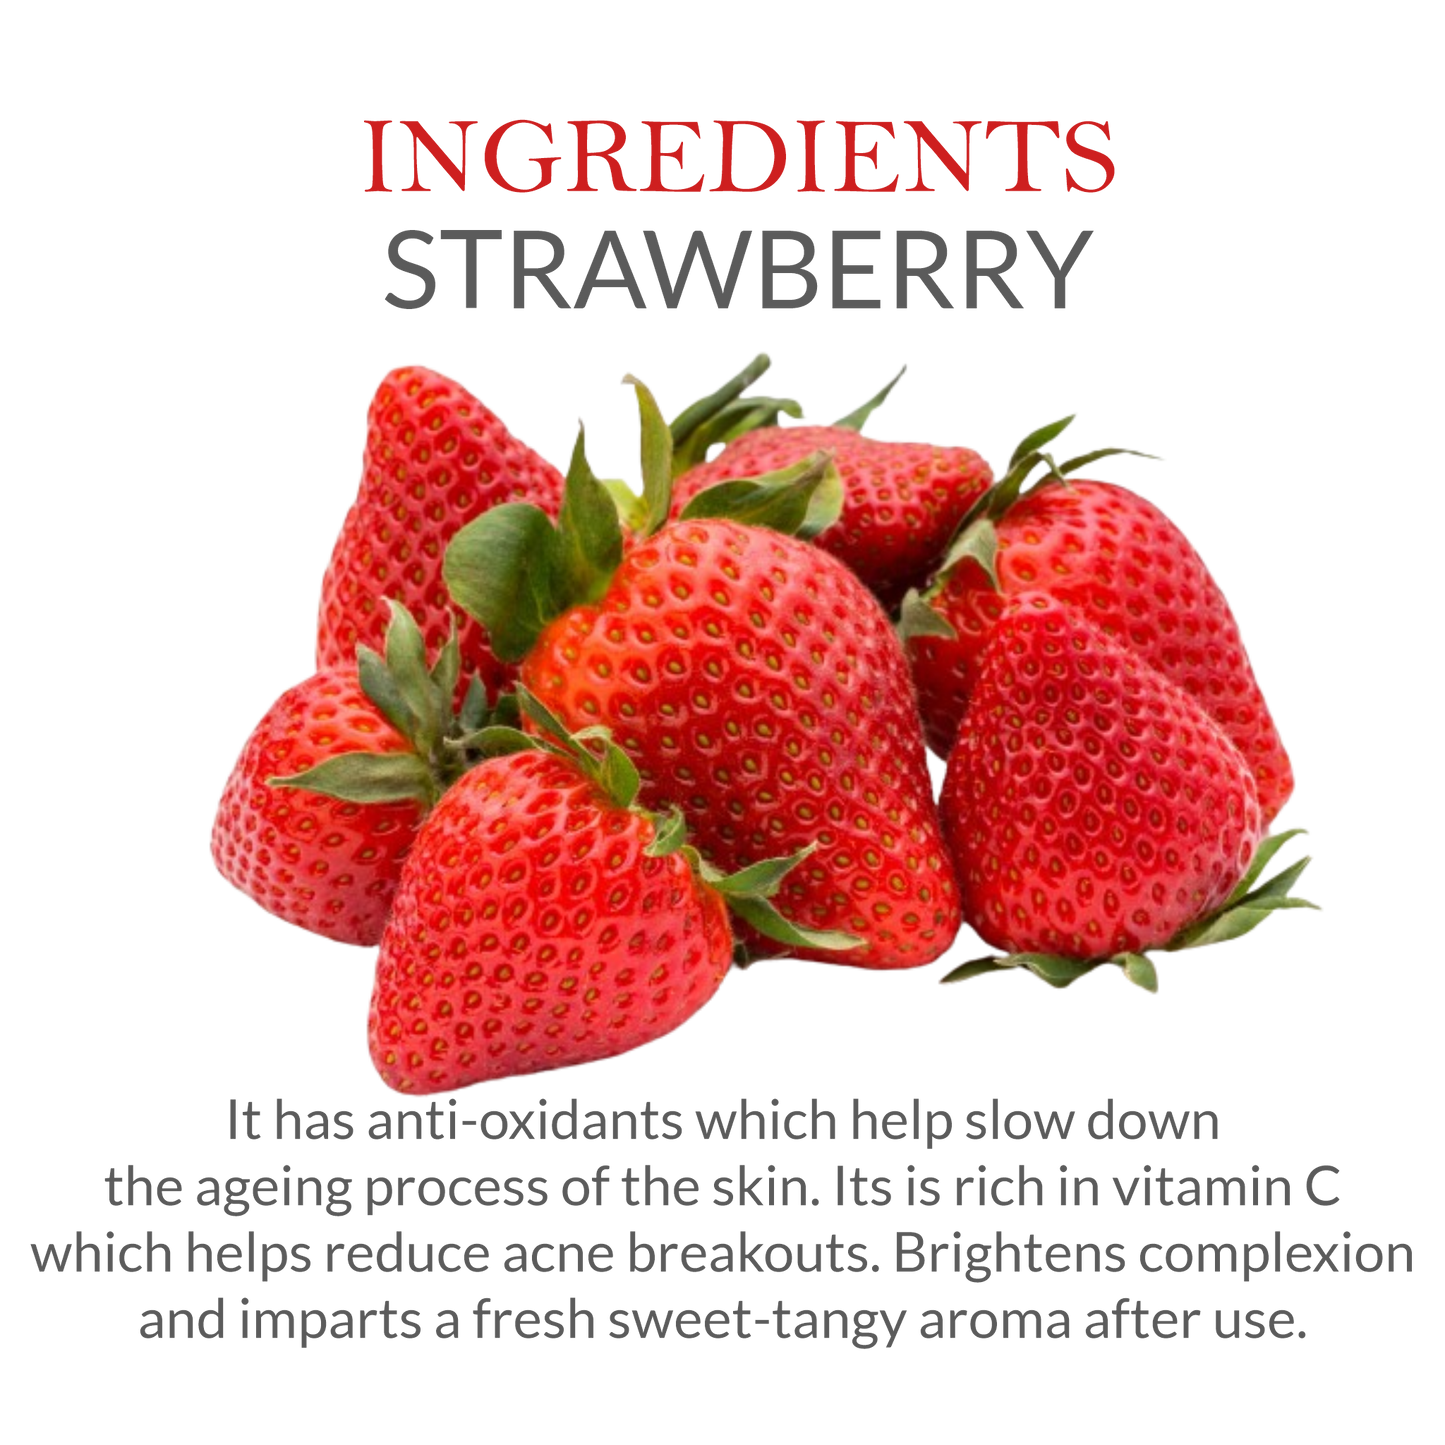 Ingredients of Strawberry soap - It has anti-oxidants which help slow down  the ageing process of the skin. Its is rich in vitamin C which helps reduce acne breakouts. Brightens complexion  and imparts a fresh sweet-tangy aroma after use.